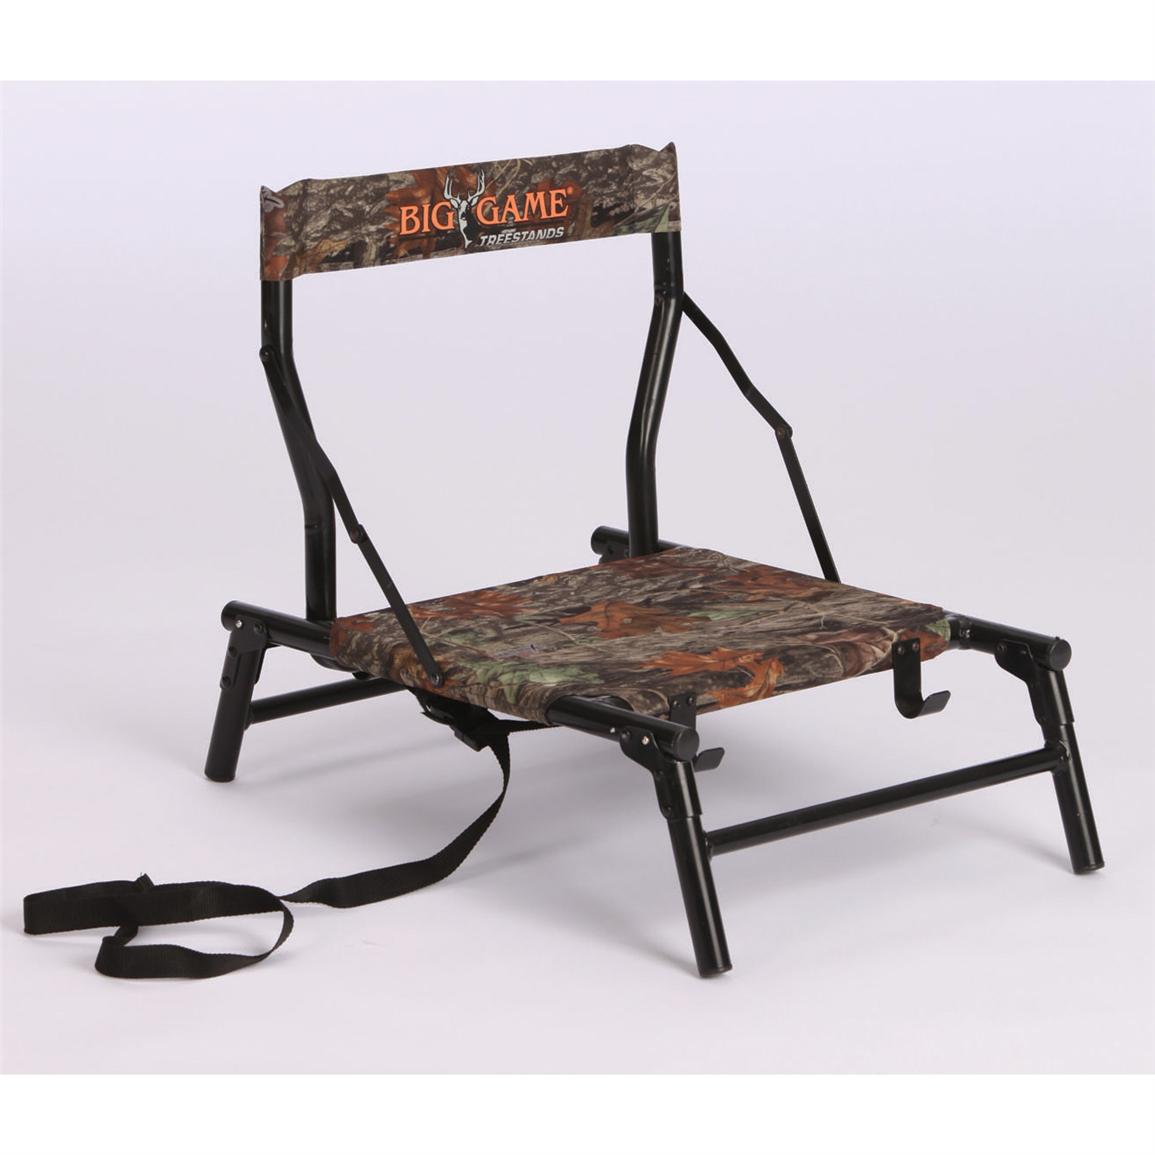 Big Game Folding Turkey Chair 221232 Stools Chairs Seat